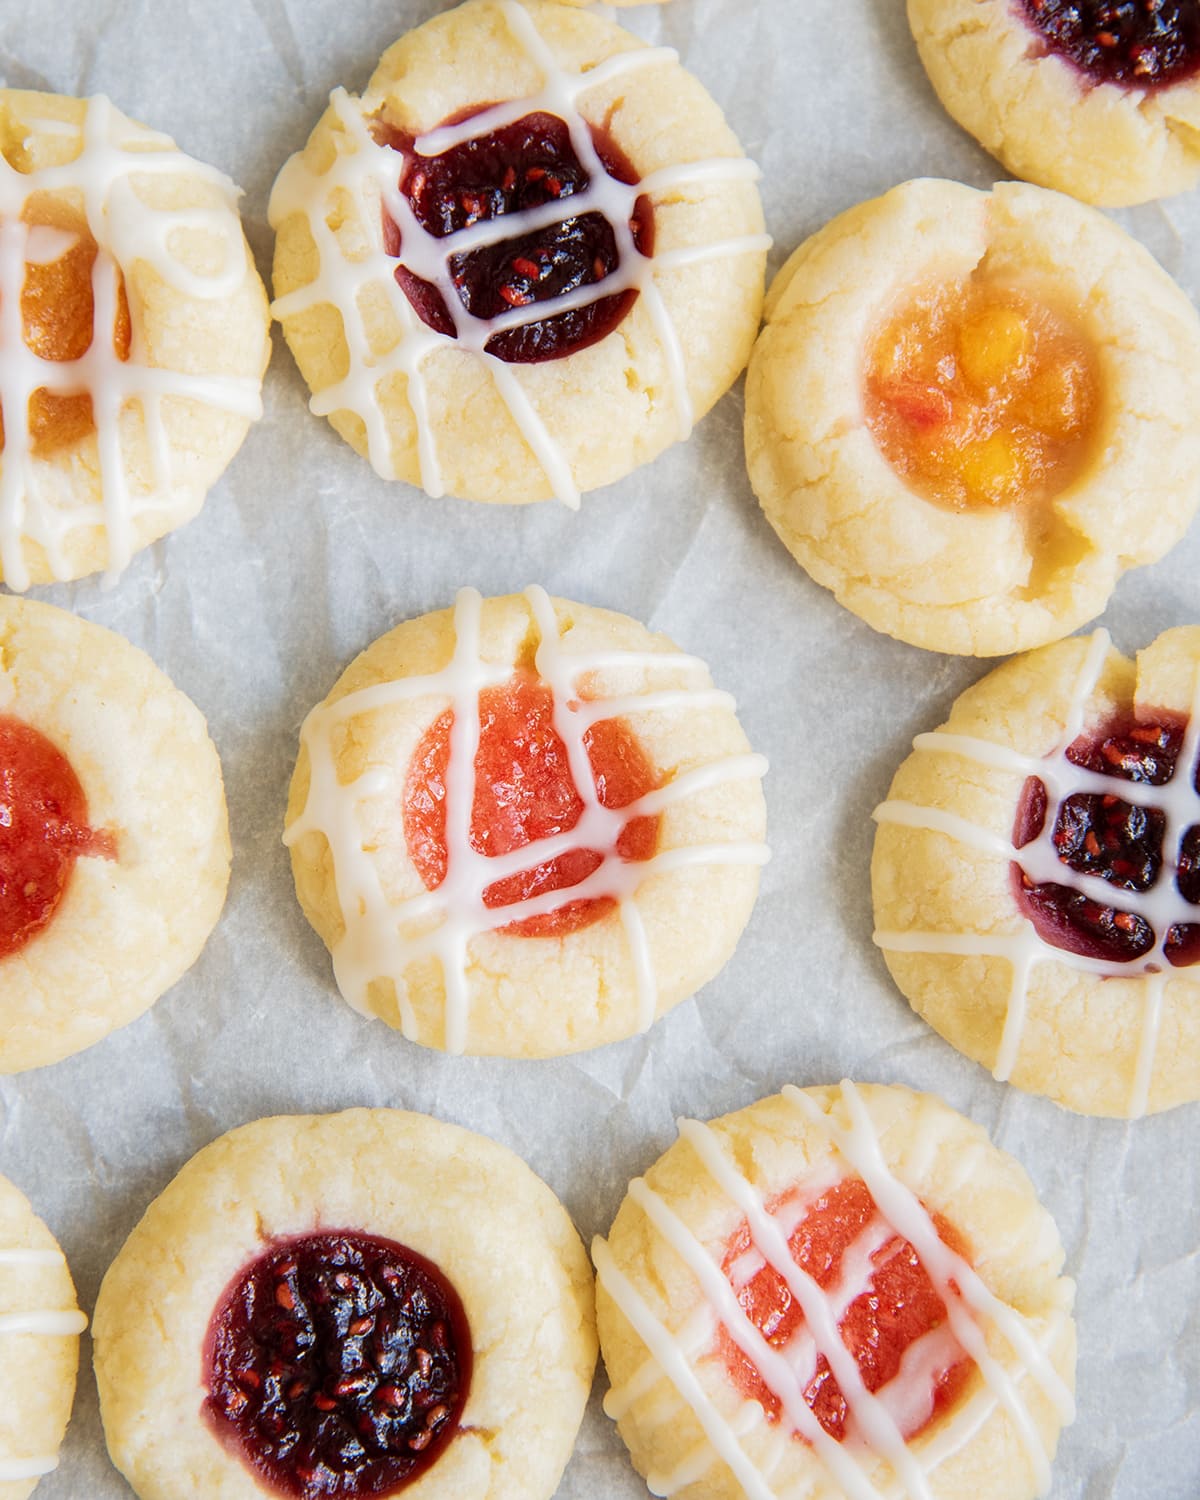 Thumbprint jam cookies filled with a variety of jams on a piece of parchment paper.